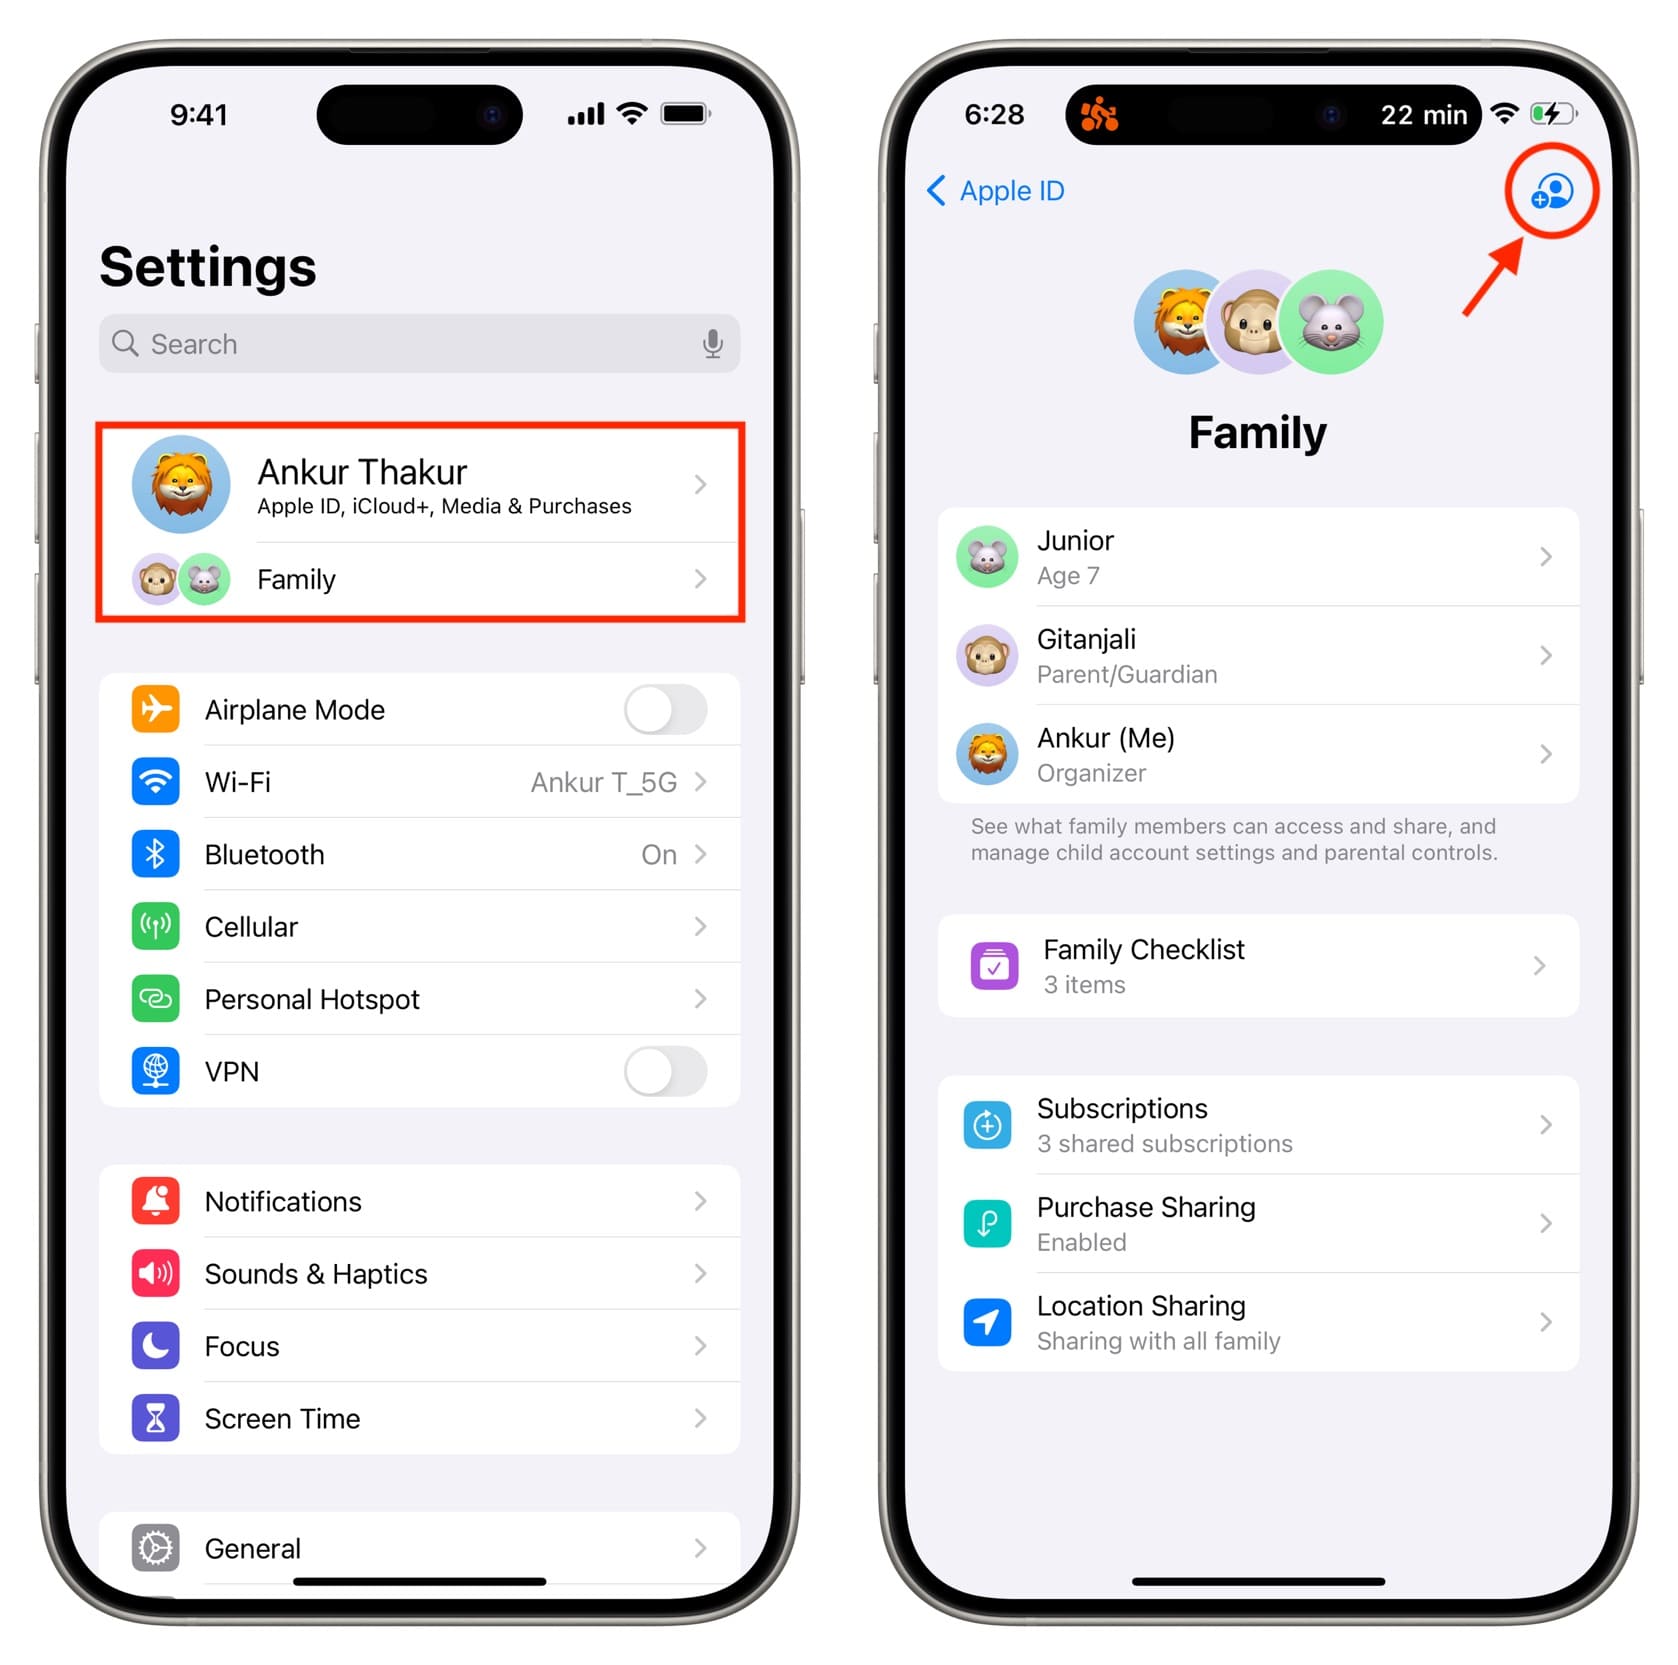 Family settings screen on iPhone